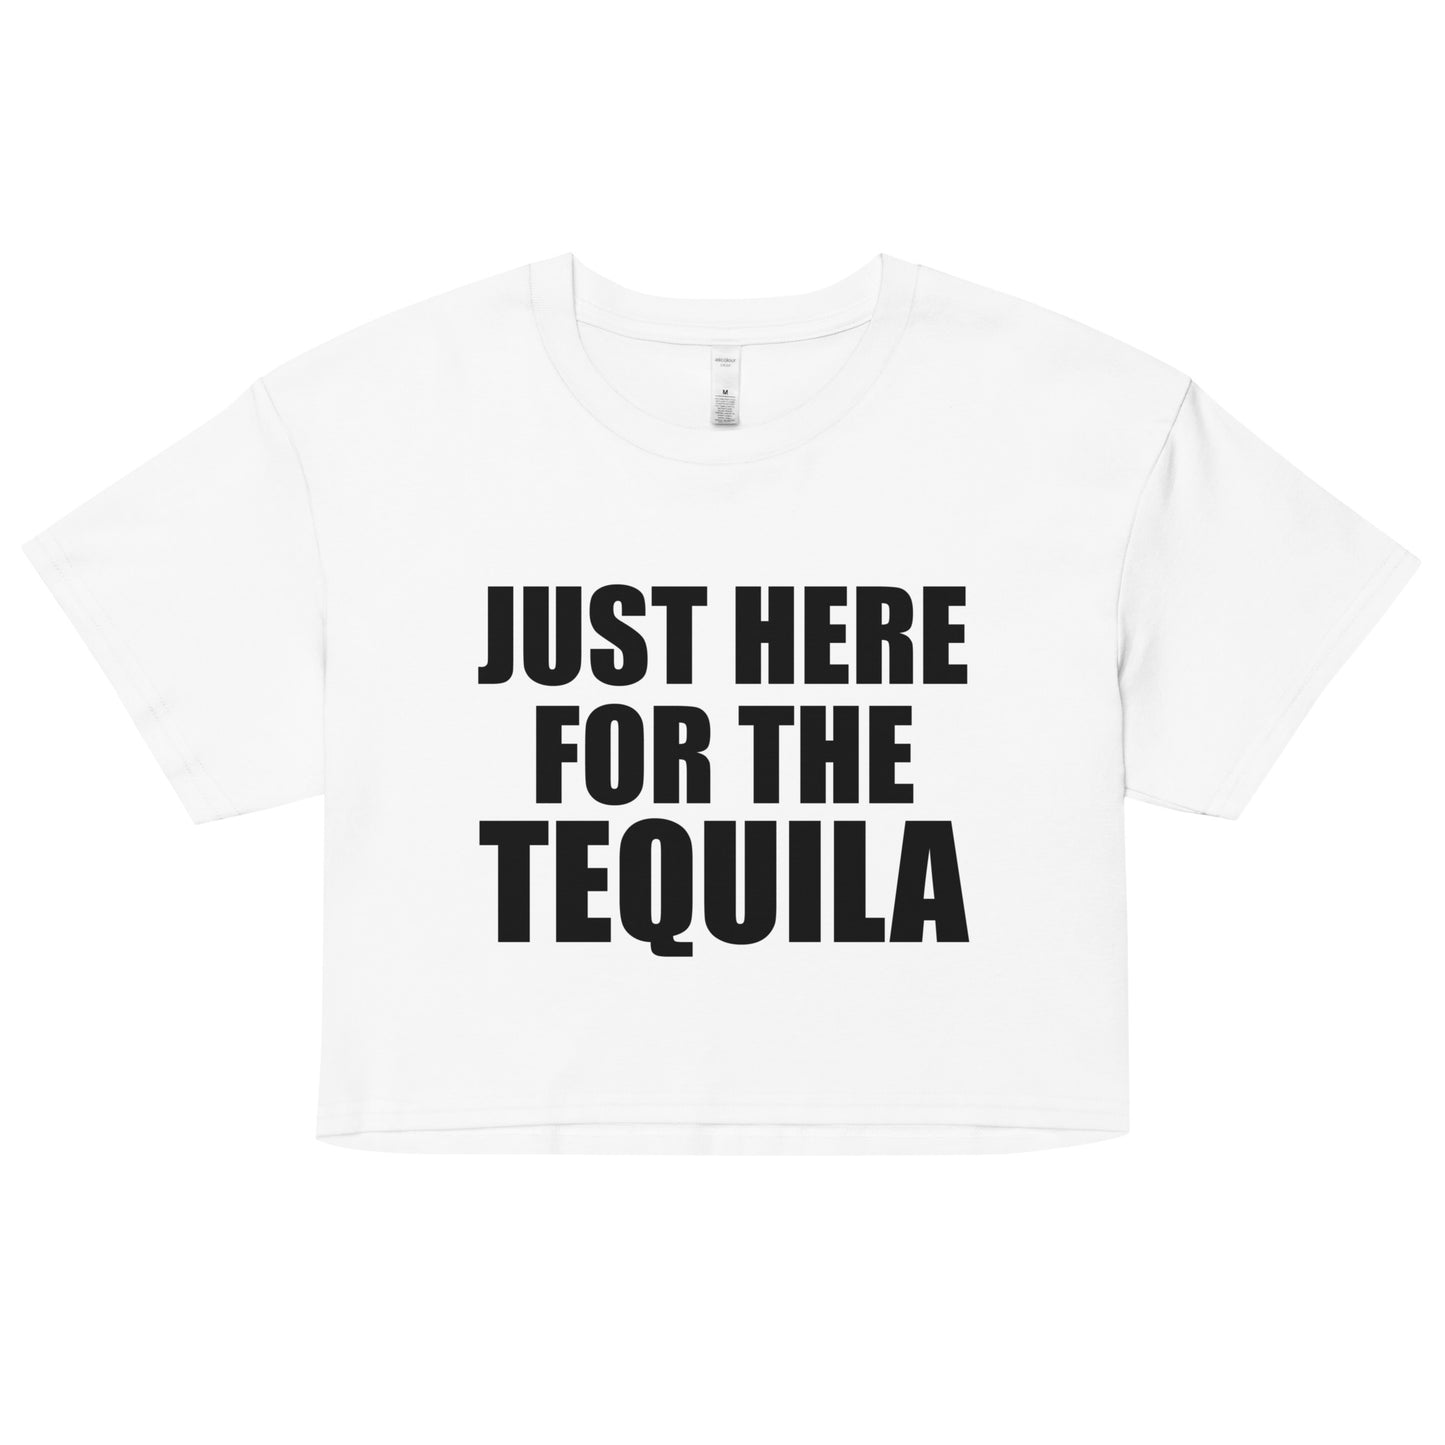 JUST HERE FOR THE TEQUILA / AND NONE OF THE BS - Women’s crop top